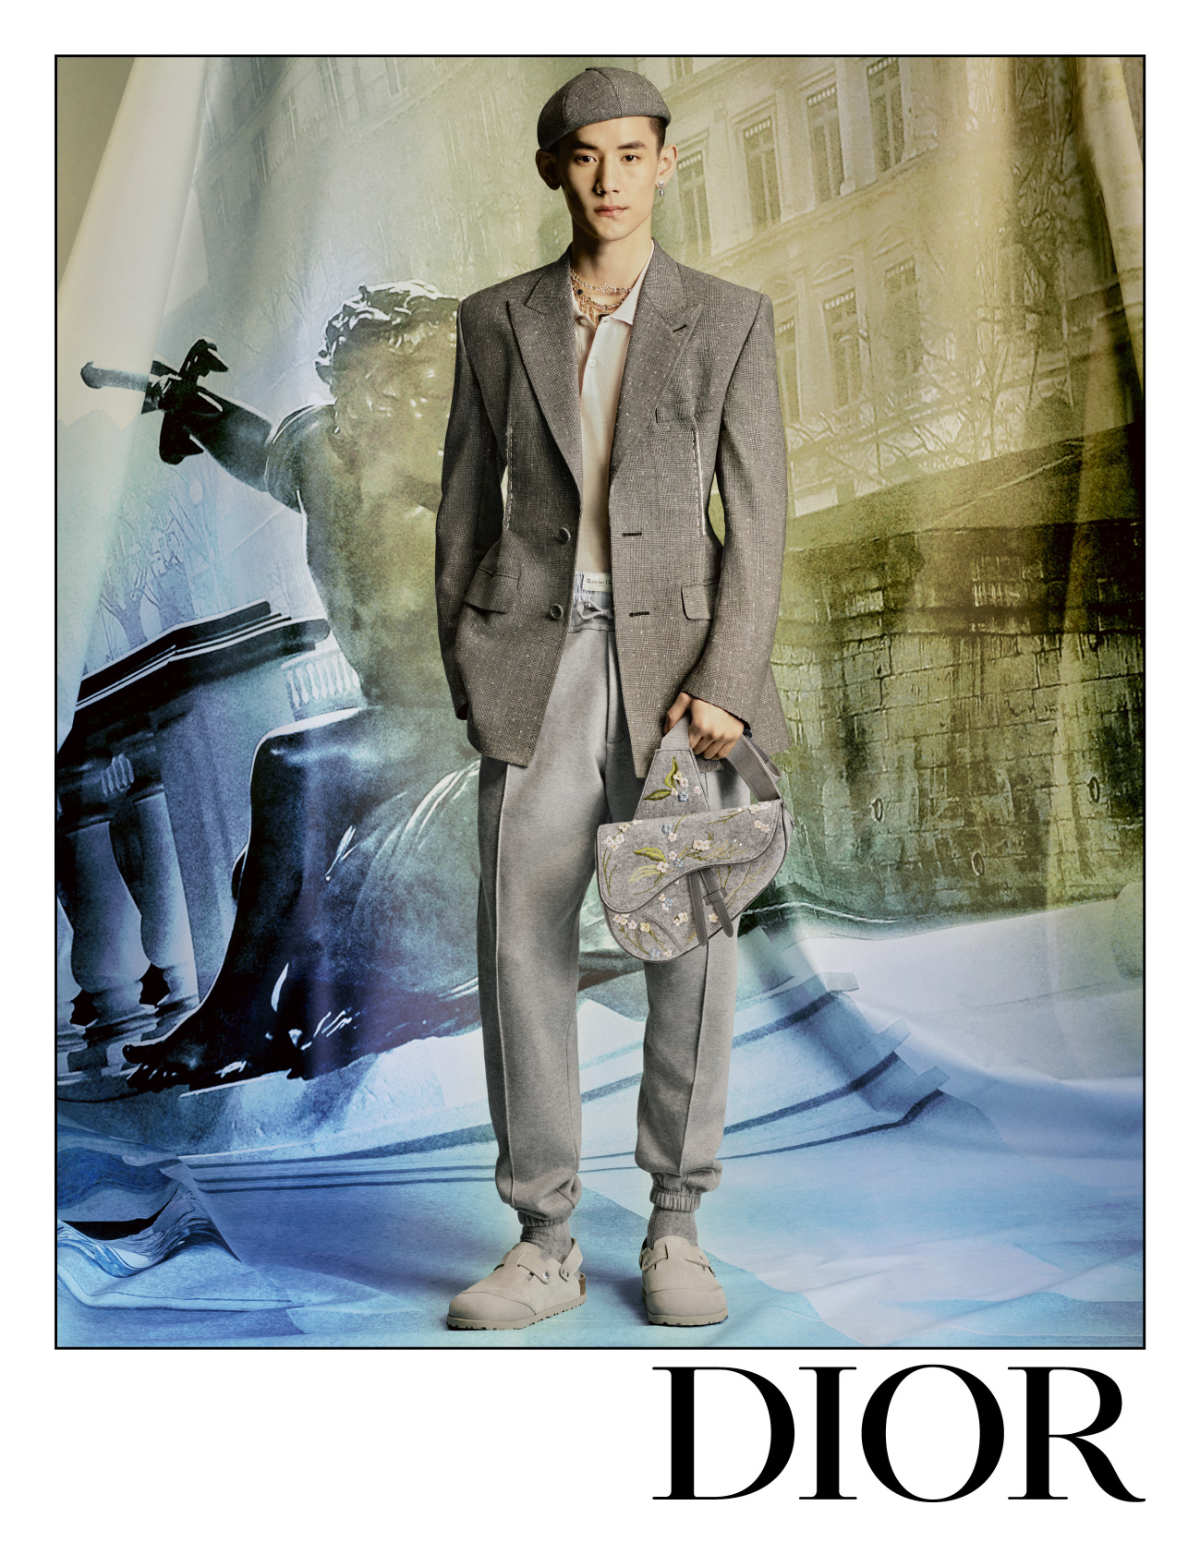 Dior Presents The Campaign For Its New Winter 2022-2023 Men’s Collection